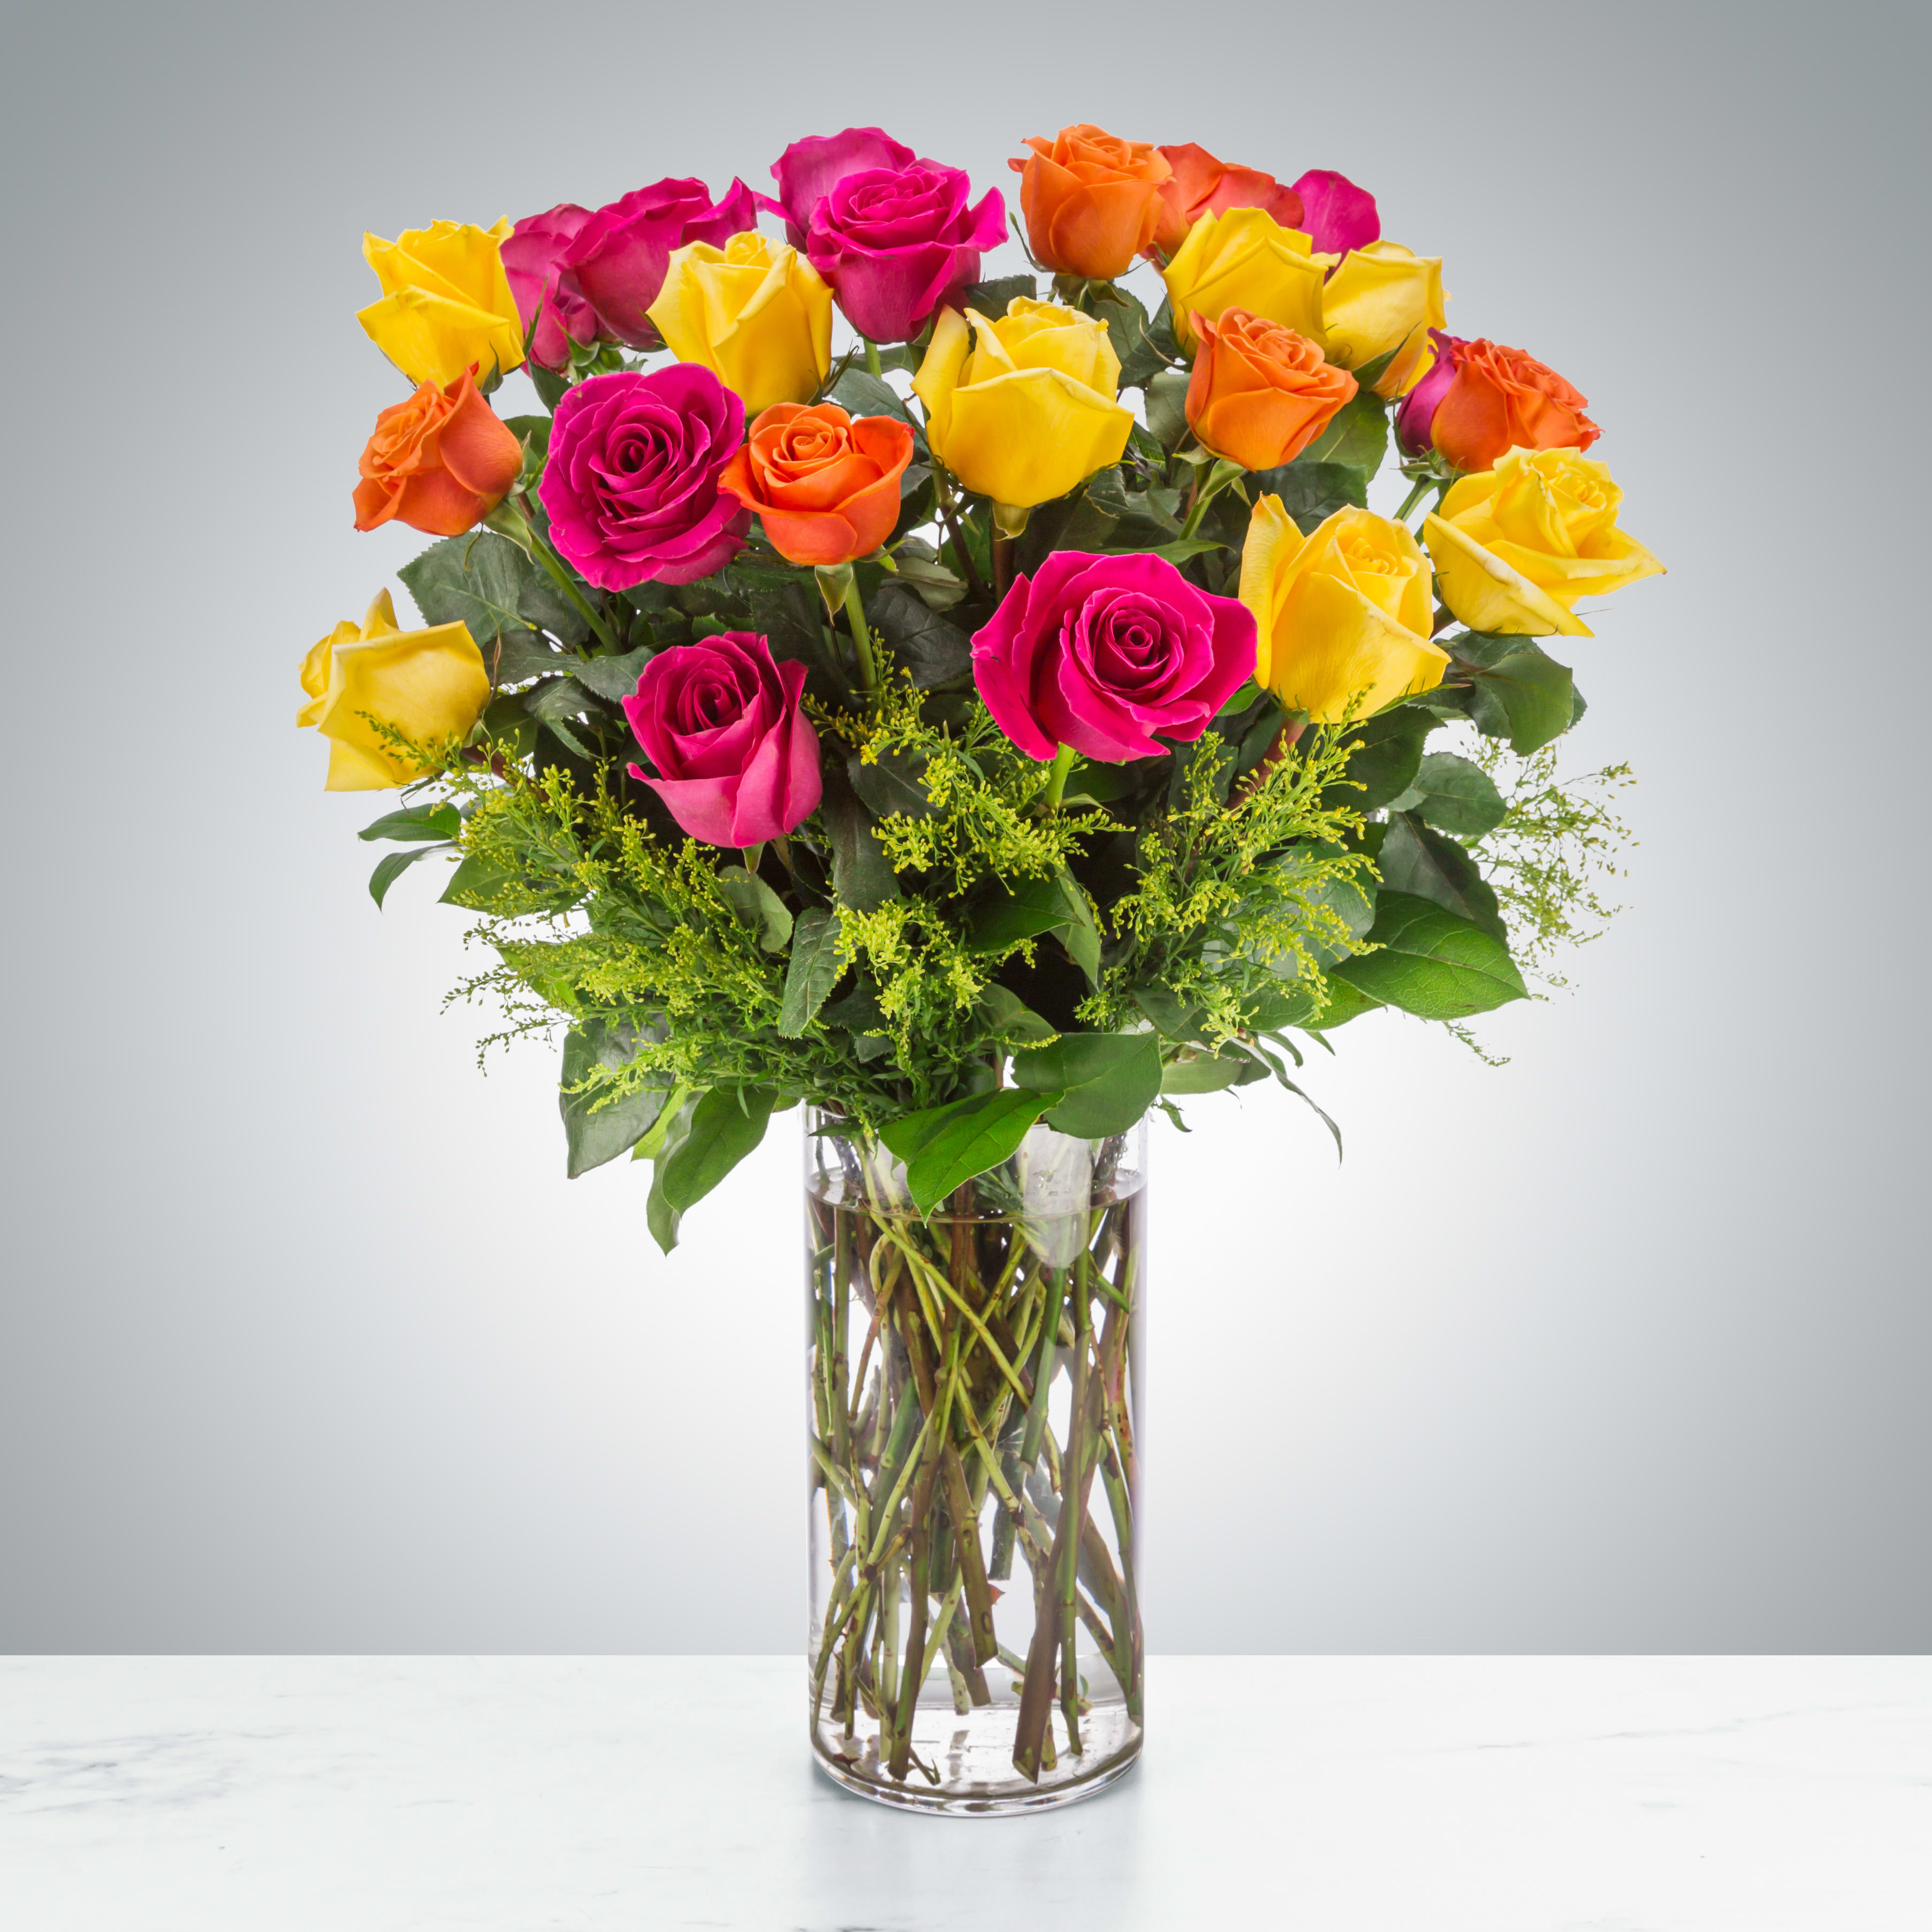 The Sound of Joy  - Send an explosion of color with this long-stemmed rose arrangement perfect for celebrations or showing your appreciation. A great alternative to the classic red rose, send a giant arrangement of multicolored bright roses.  Approximate Dimensions: 20''D x 28&quot;&quot;H